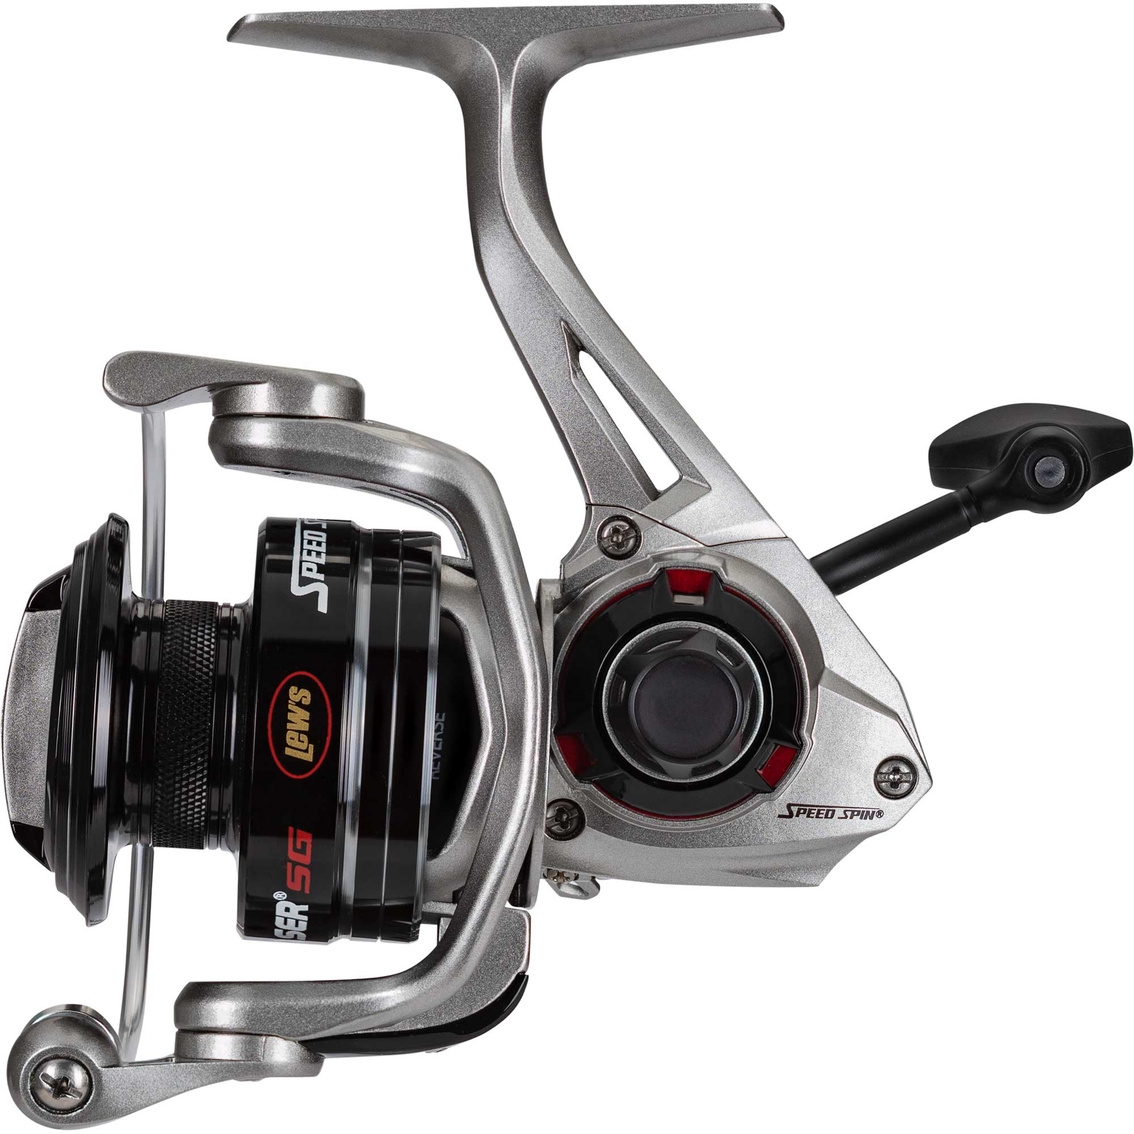 Lew's Laser Sg Speed Spin 200 Spinning Reel Clam Pack Size 11, Freshwater  Rods & Reels, Sports & Outdoors